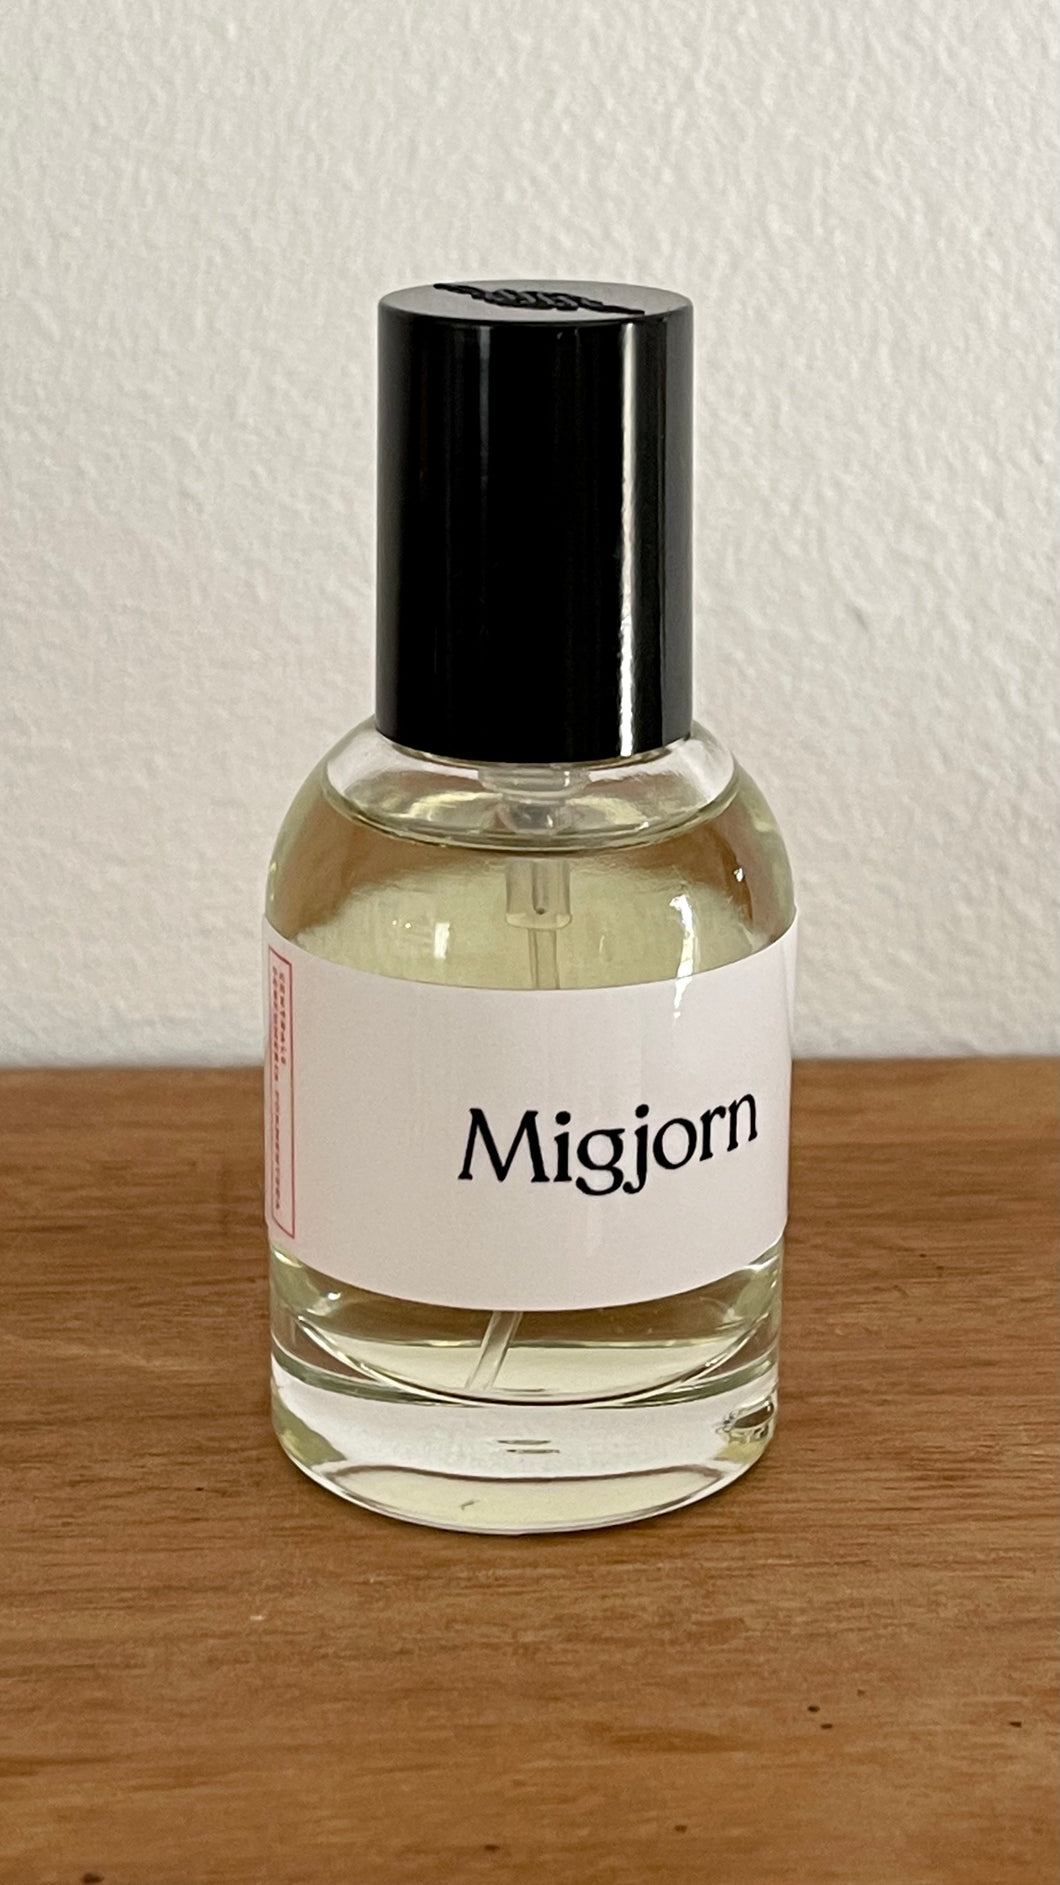 Migjorn only available on new website centraleperfumeria.com